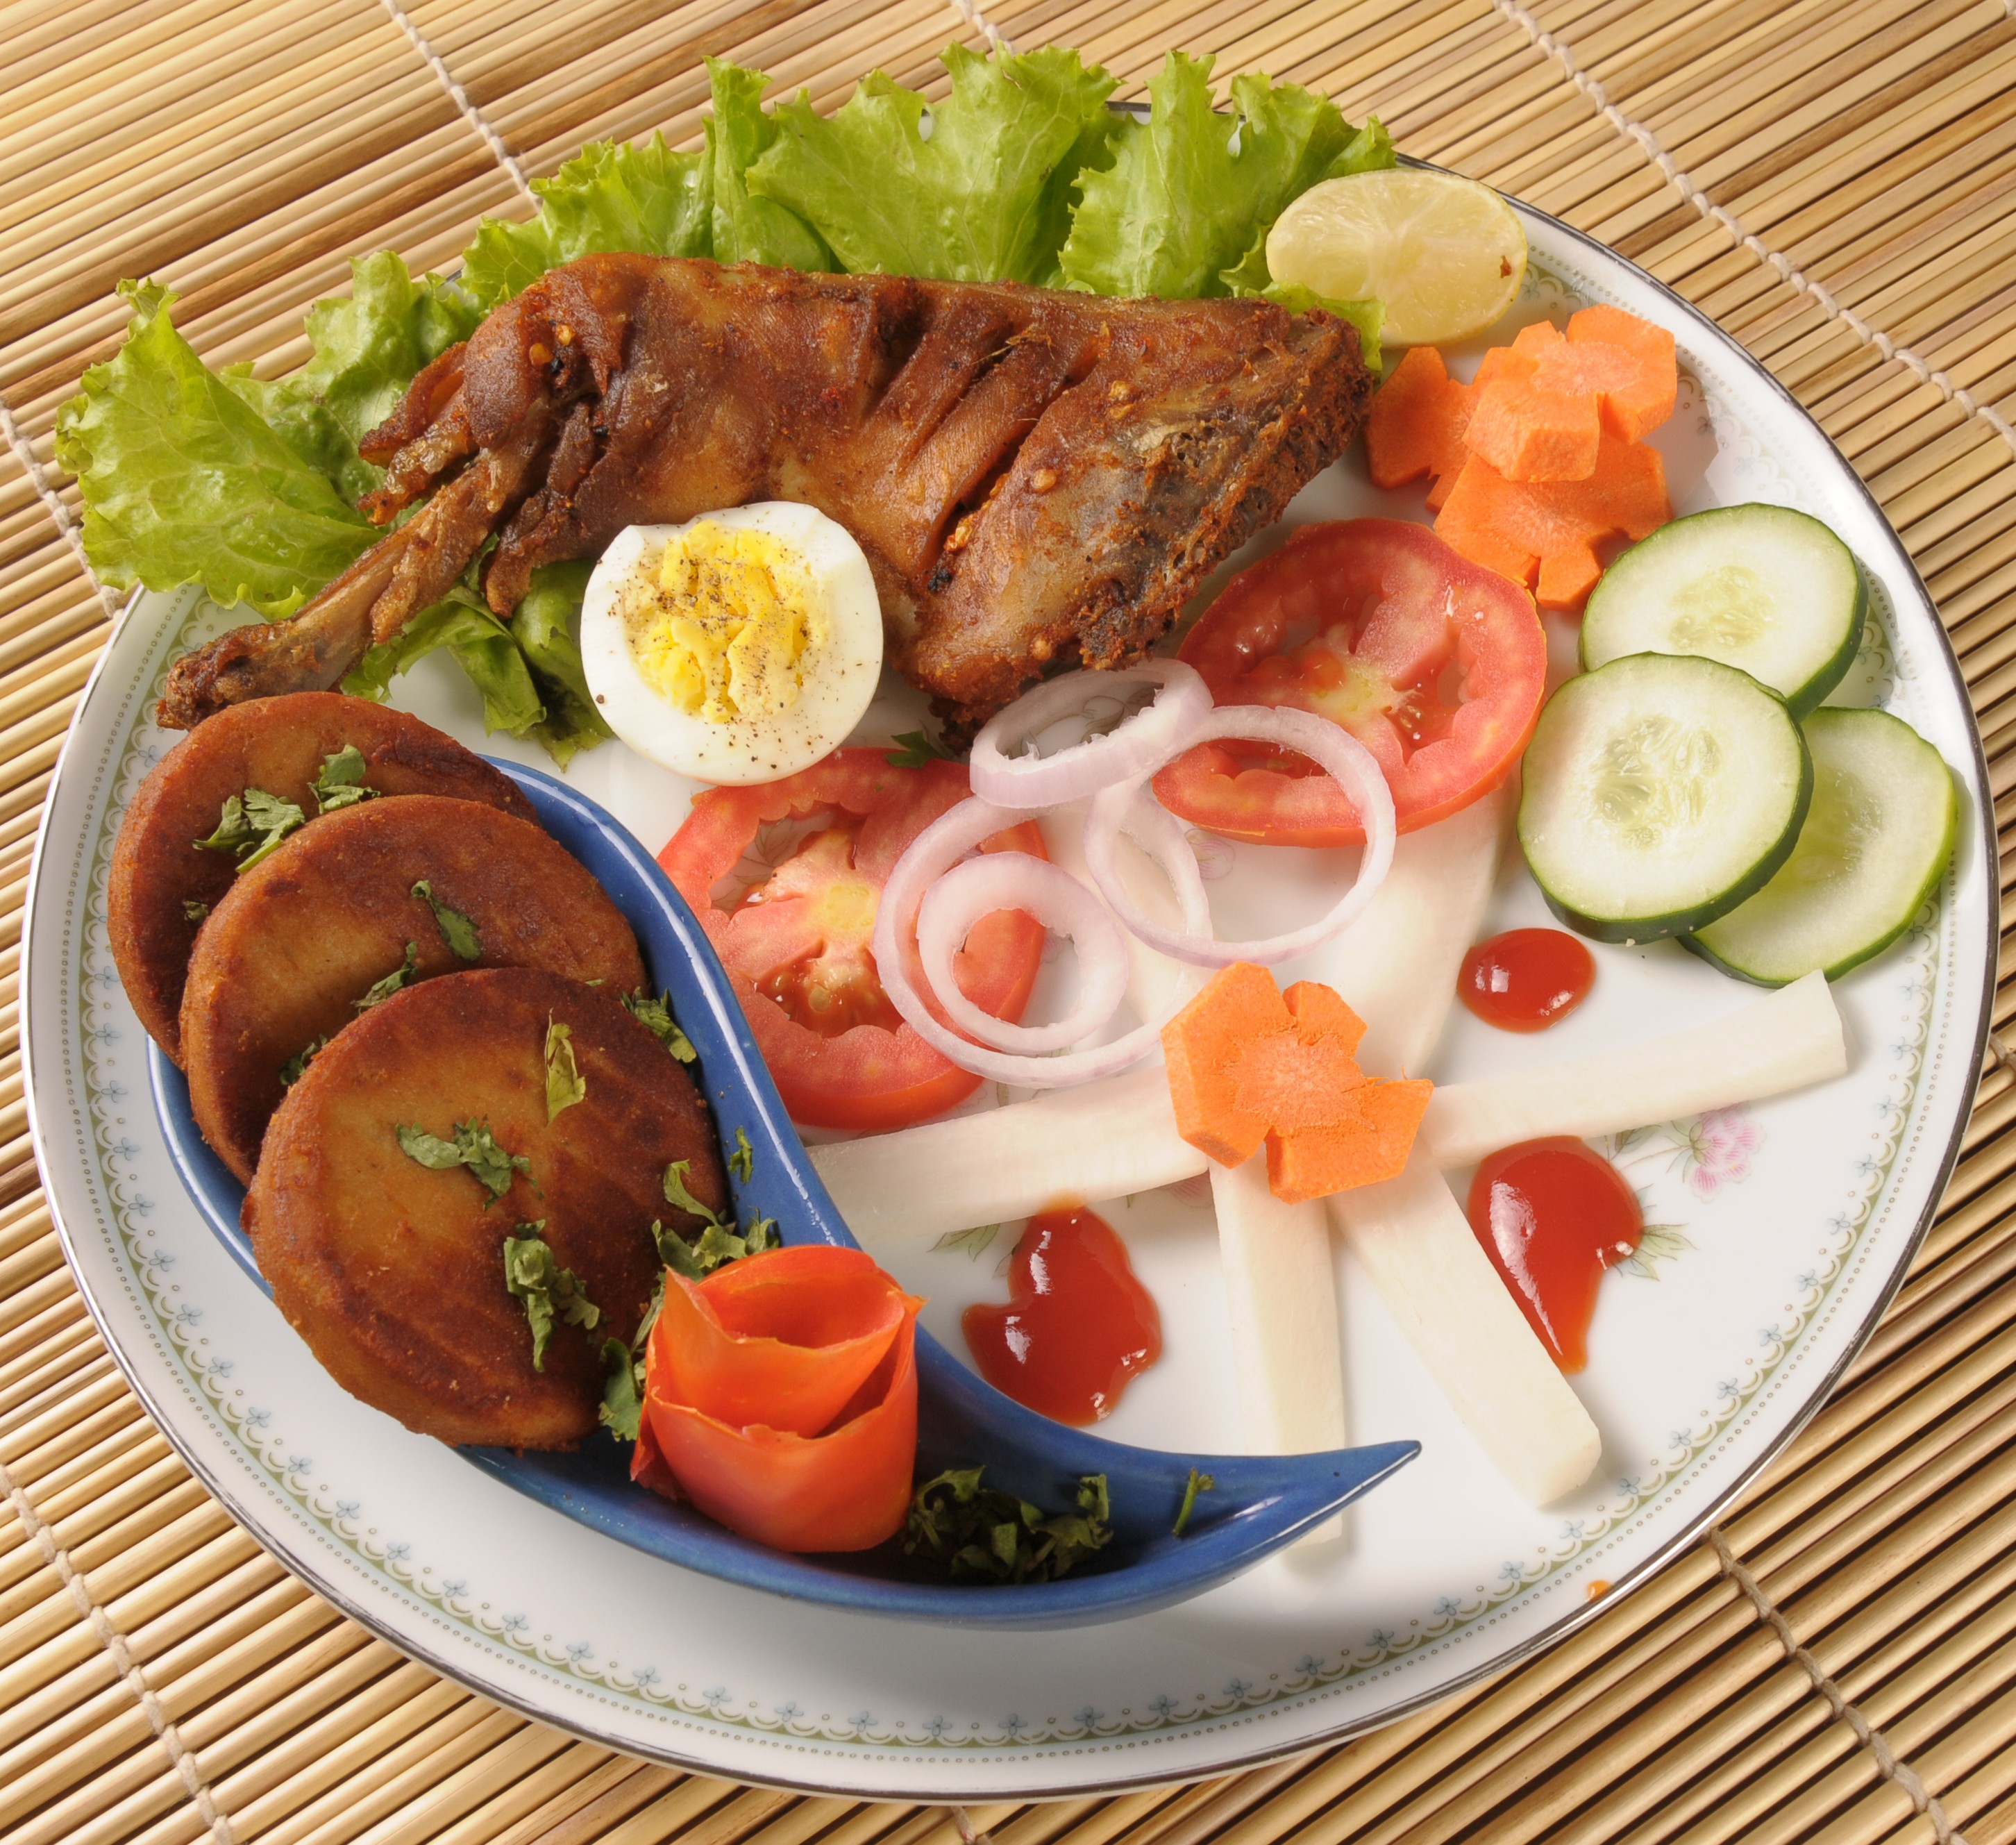 A delicious food served with fresh salad